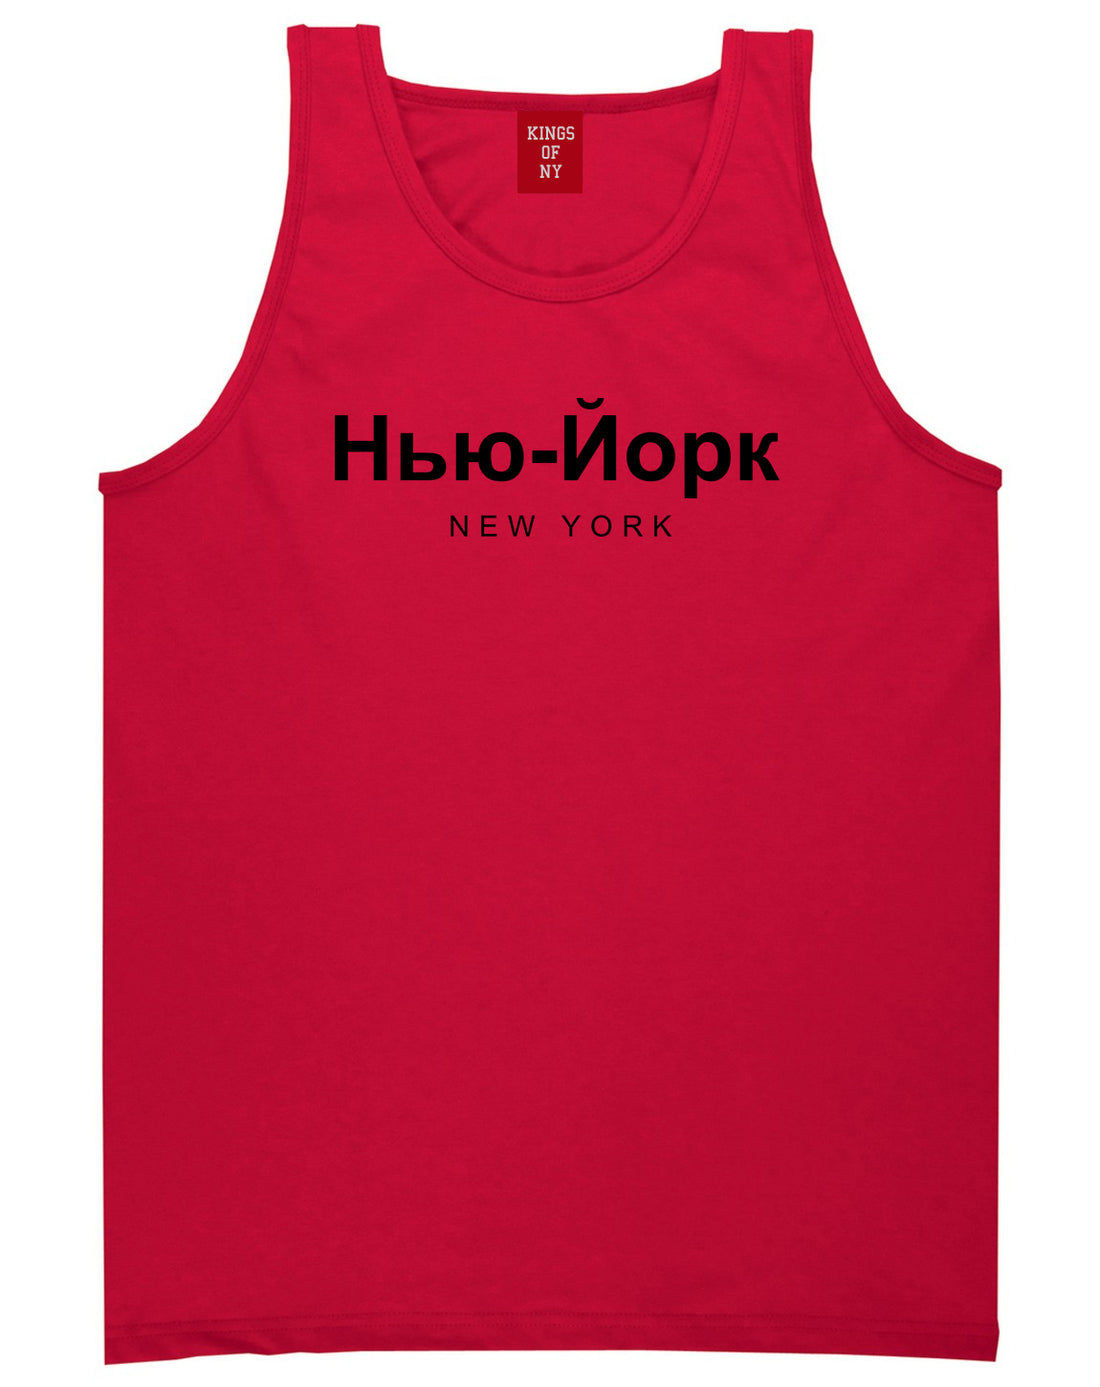 New York In Russian Mens Tank Top Shirt Red by Kings Of NY